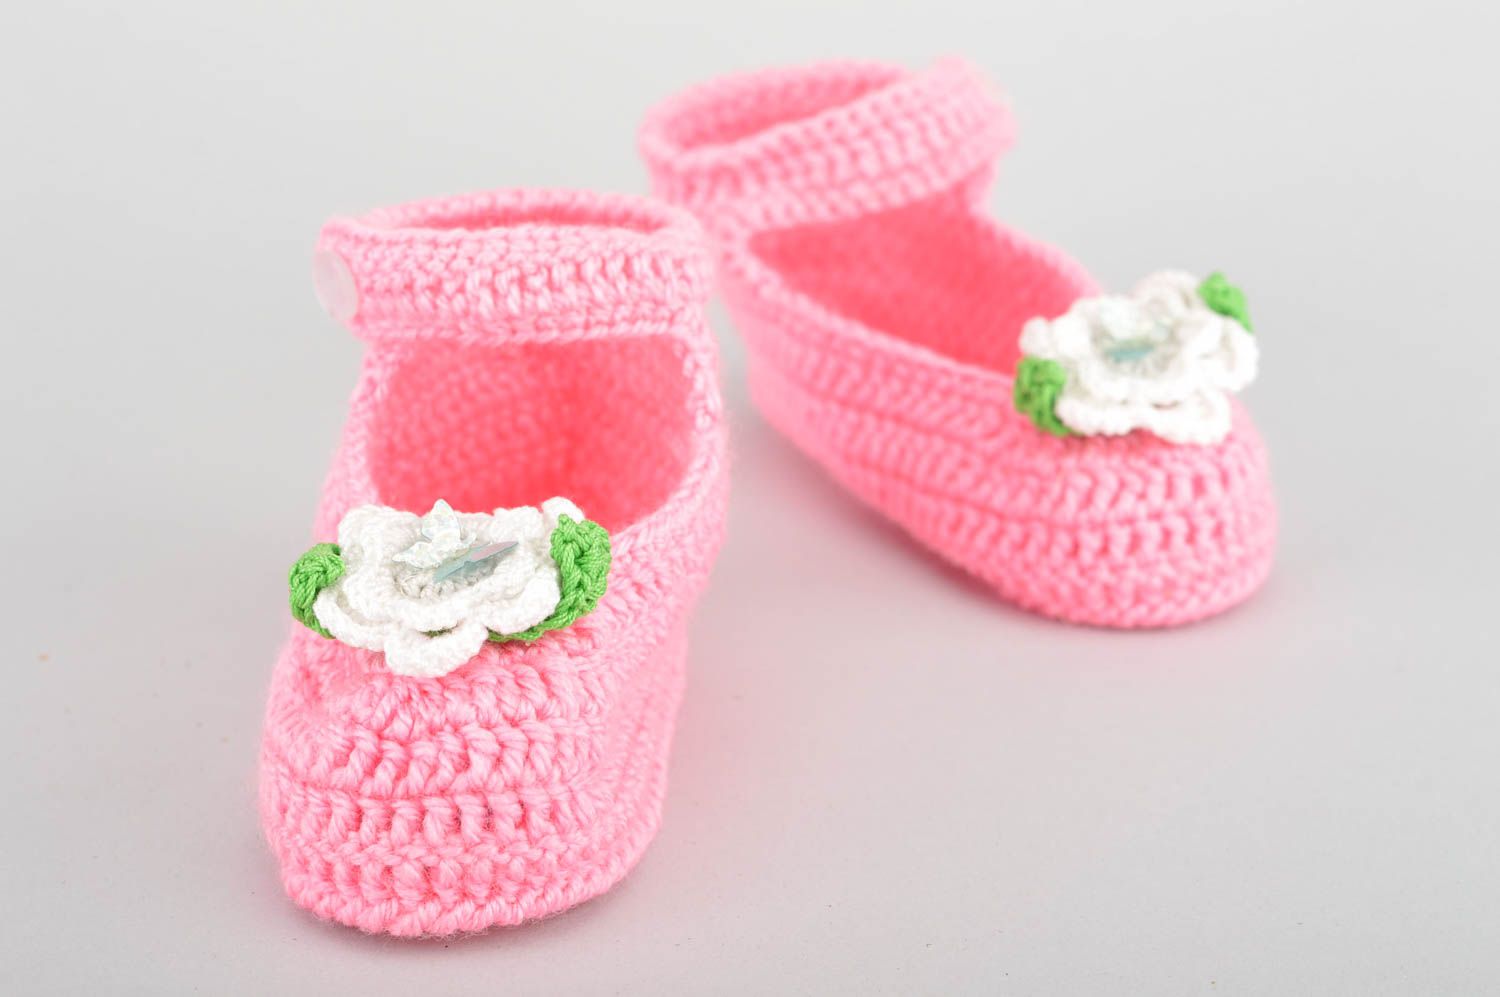 Crocheted designer handmade pink baby bootees made of cotton for girls photo 2